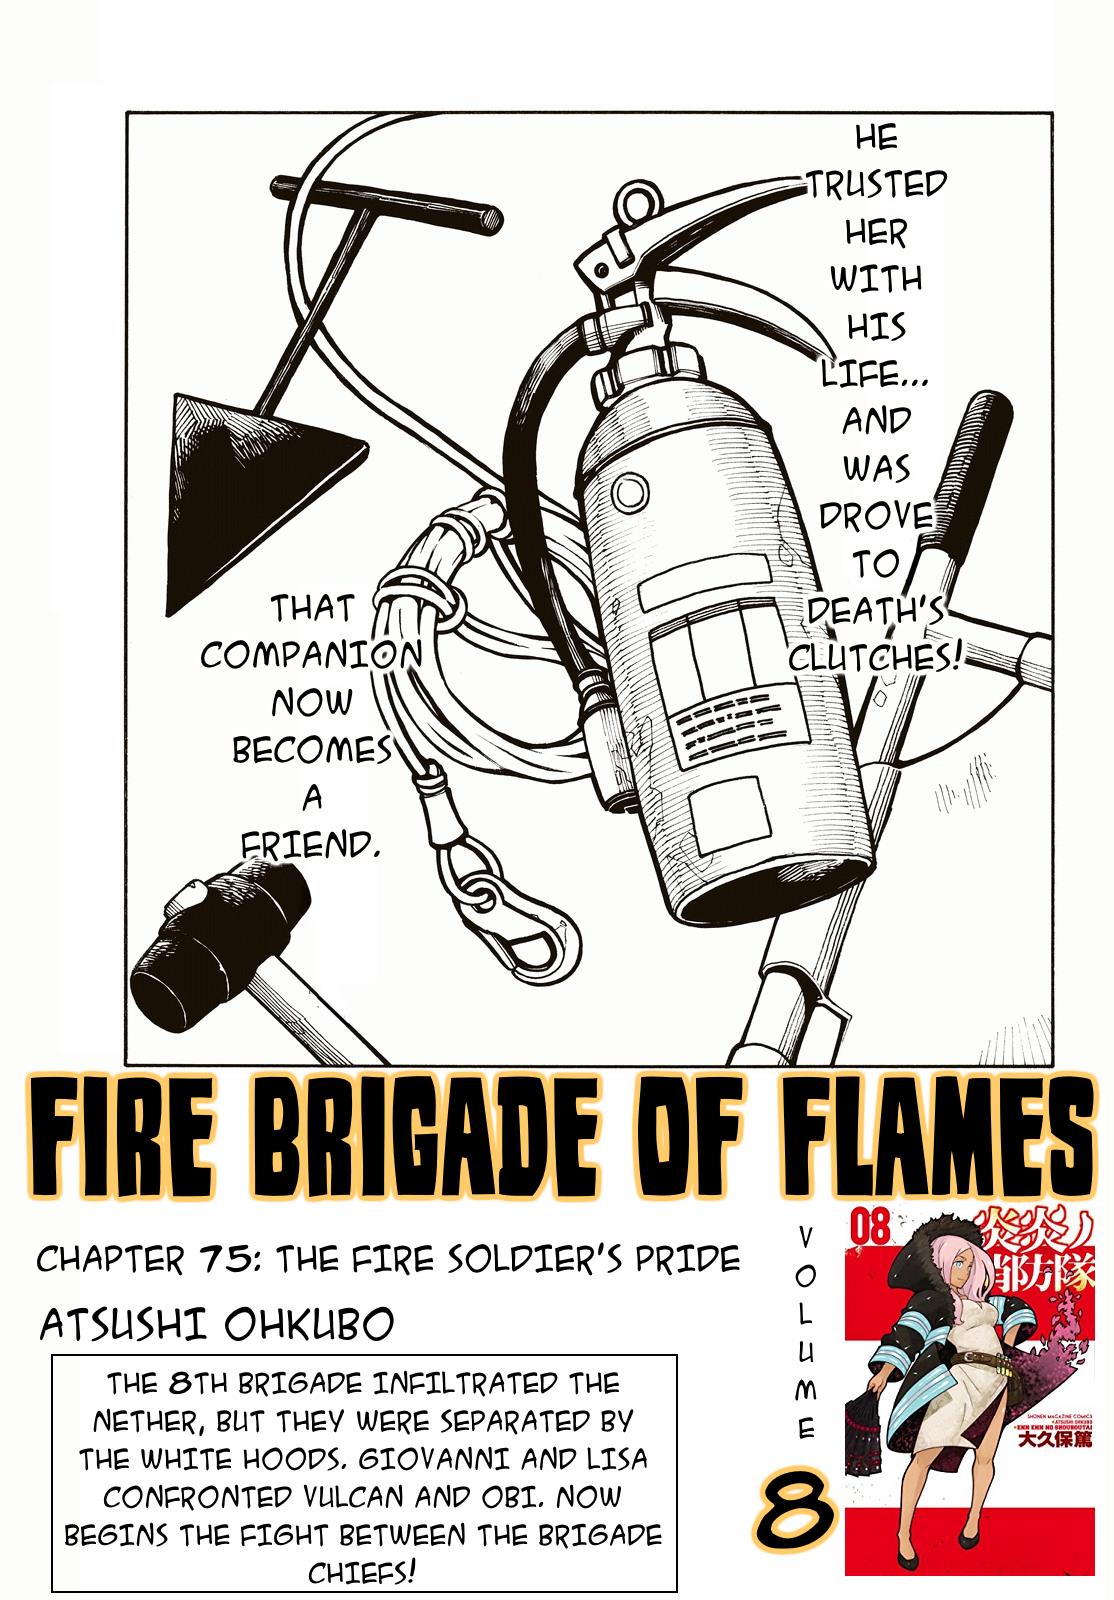 Fire Force Vol. 9 Ch. 75 The Fire Solider's Pride